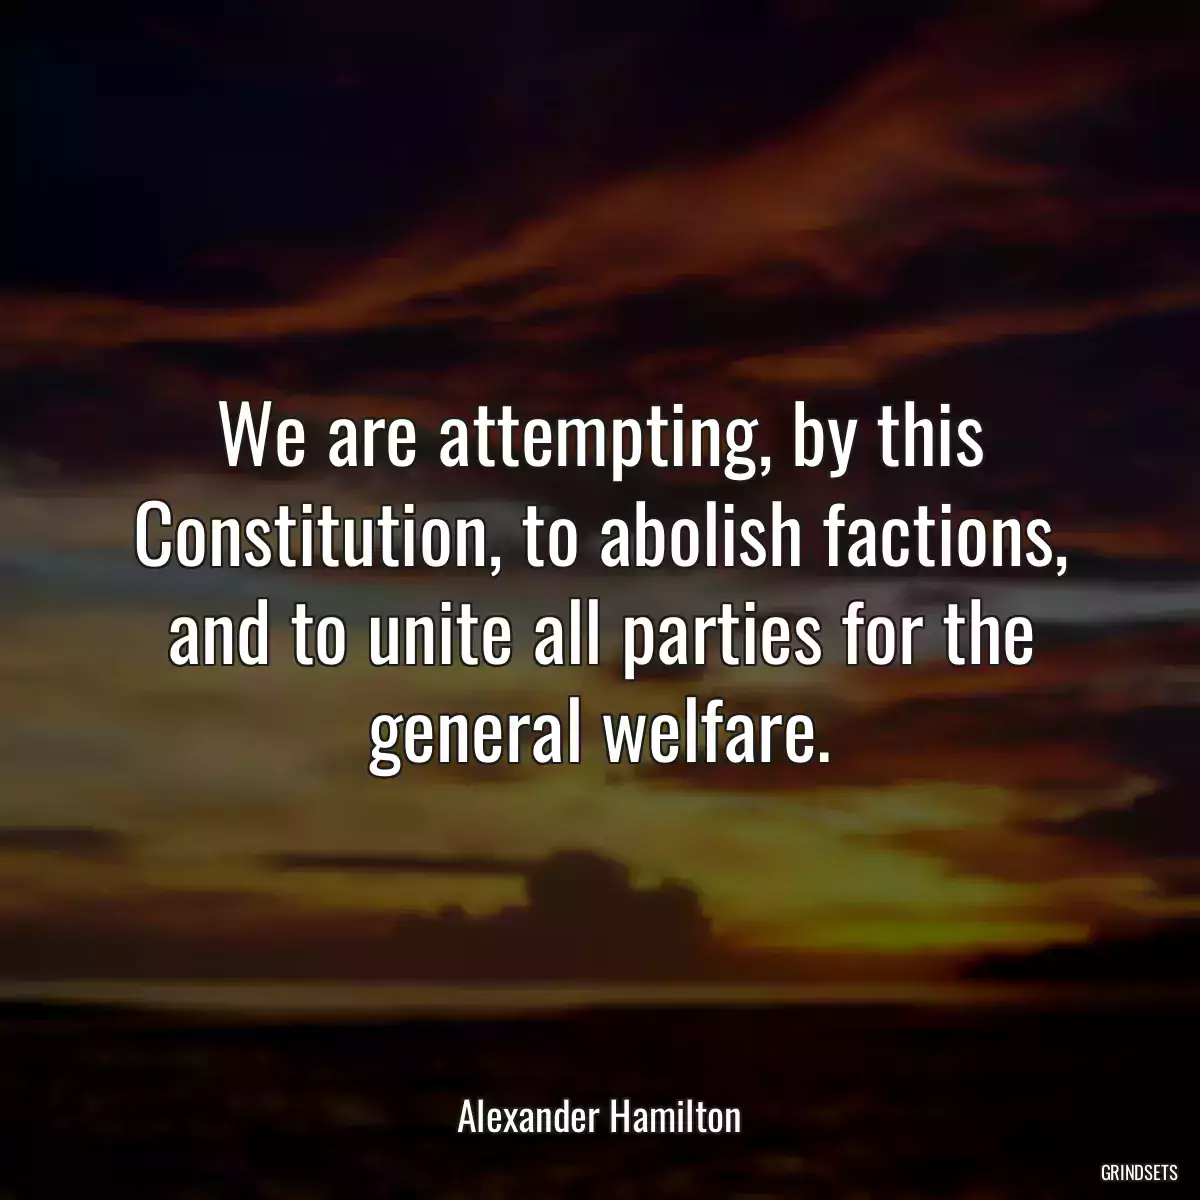 We are attempting, by this Constitution, to abolish factions, and to unite all parties for the general welfare.